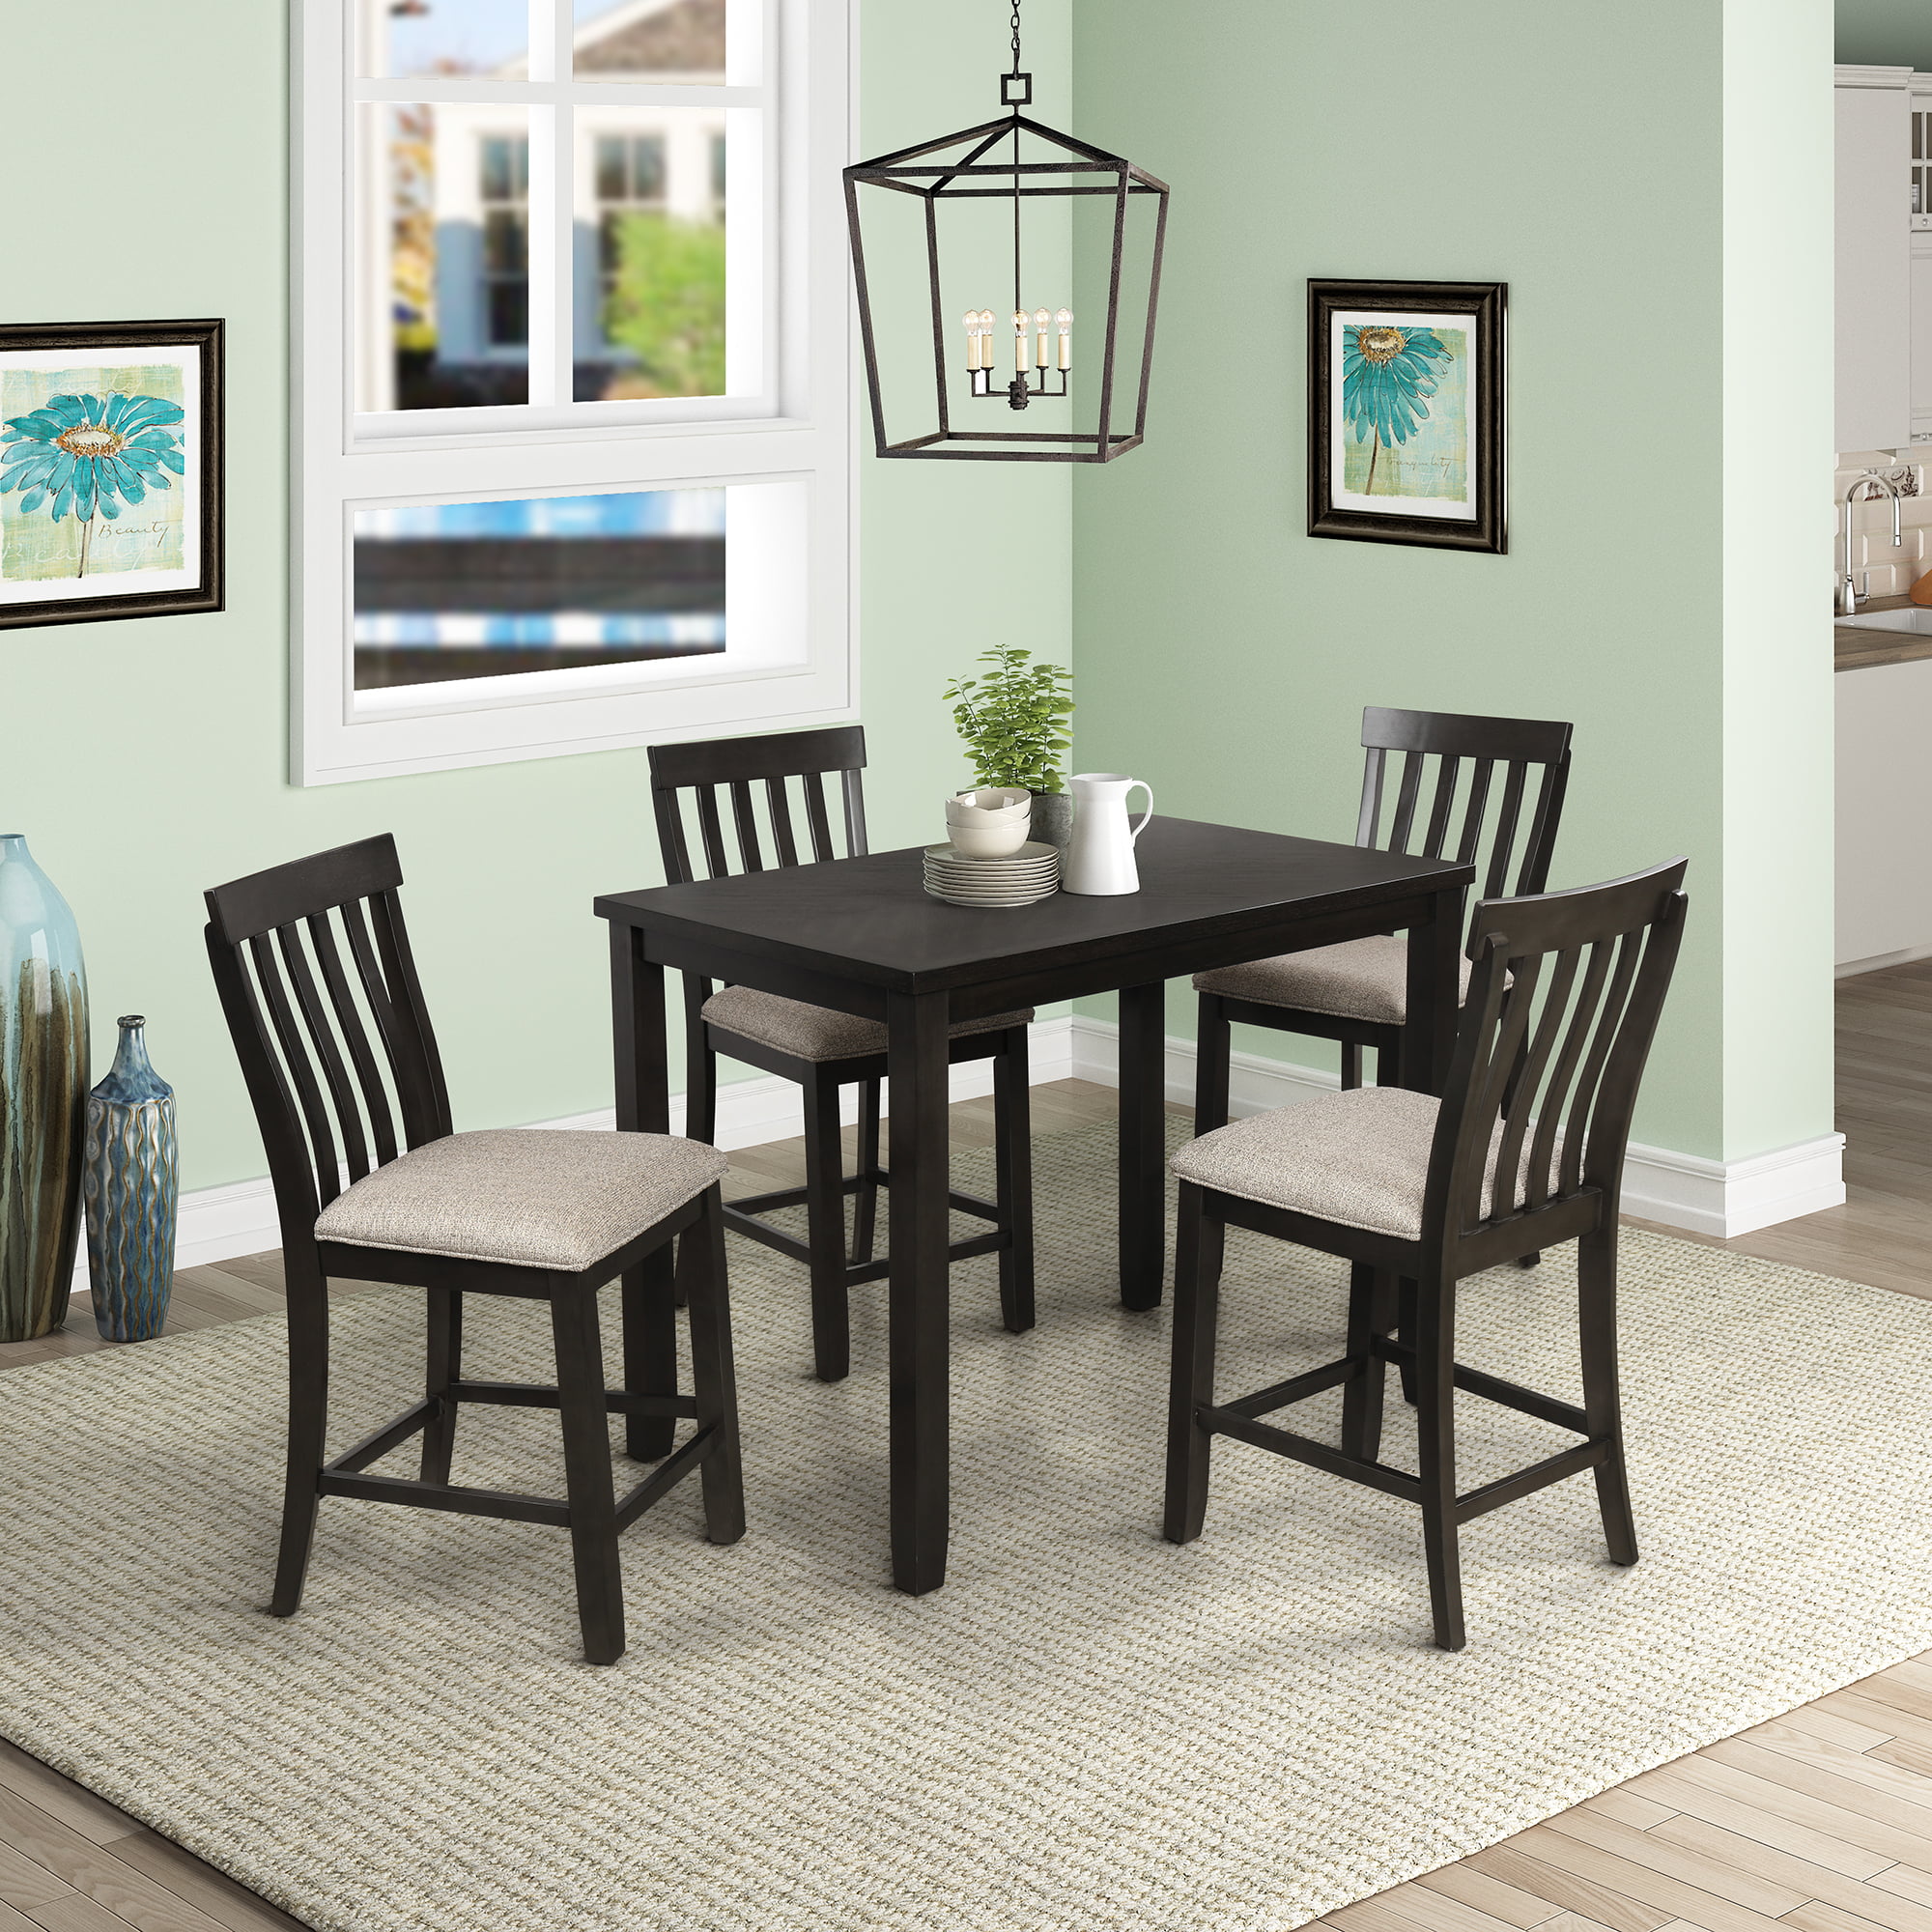 Best Clearance Dining Room Furniture 